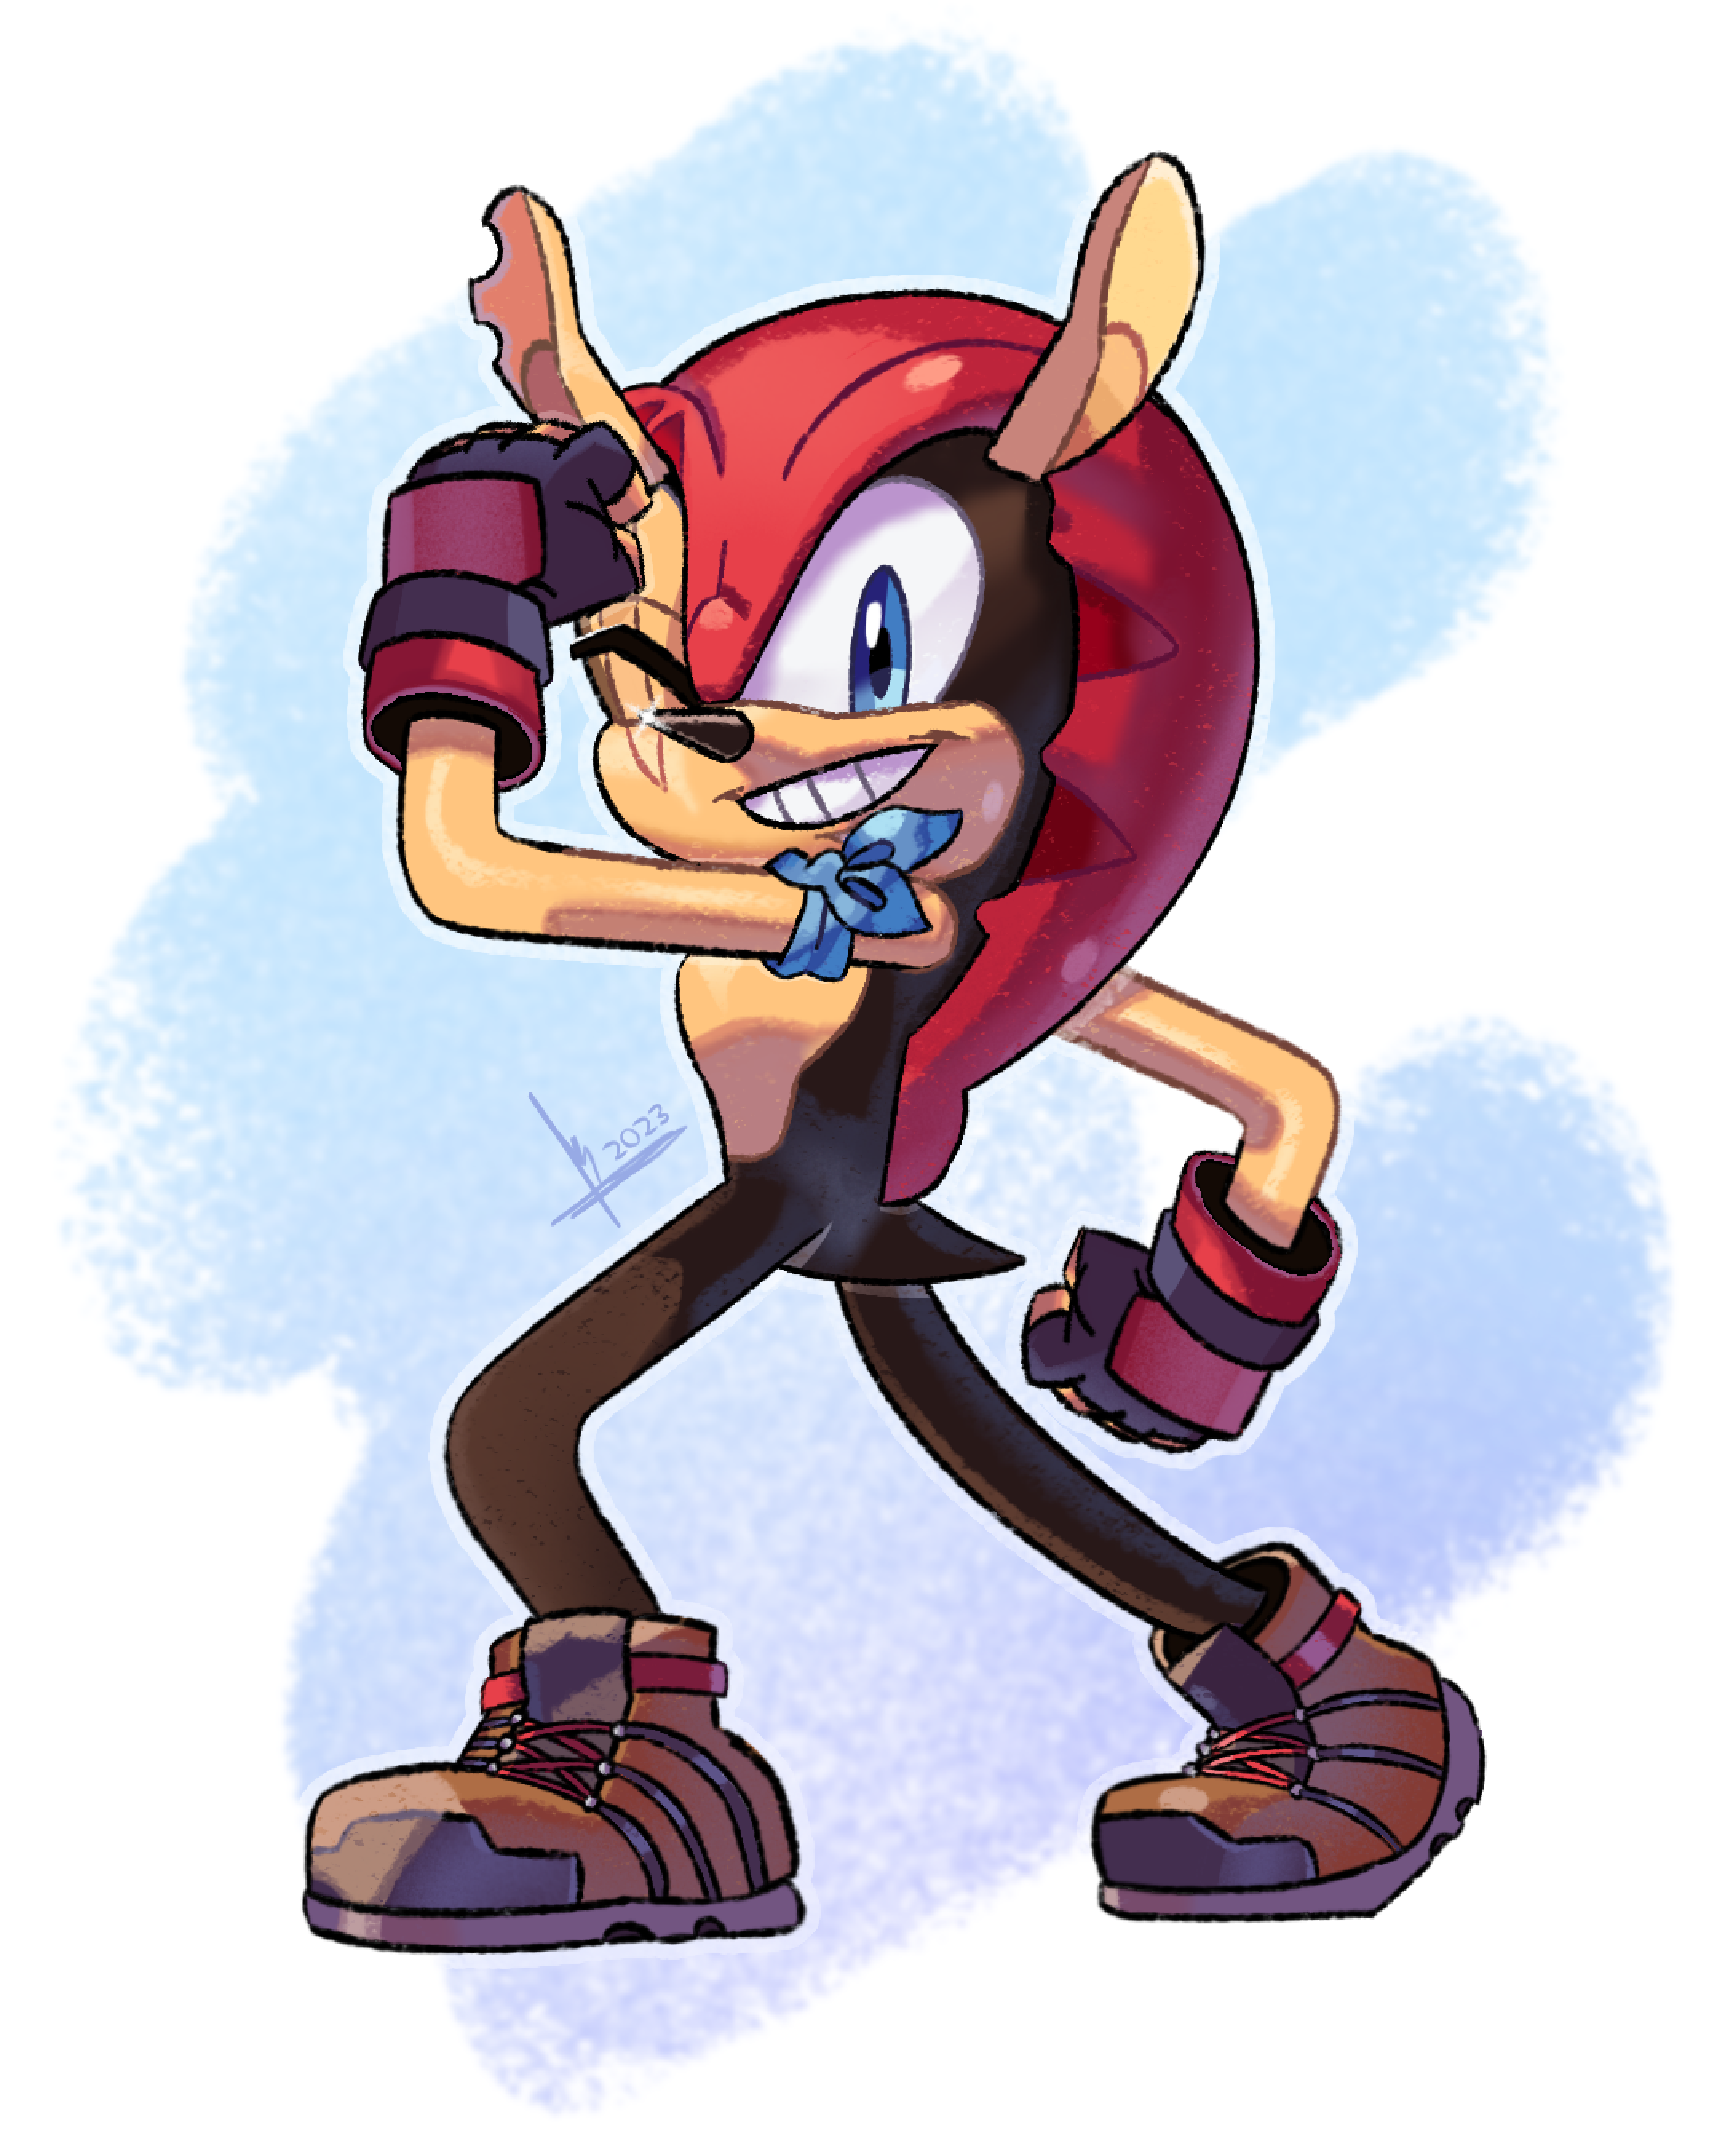 Mighty the Armadillo by MsGore666 on Newgrounds